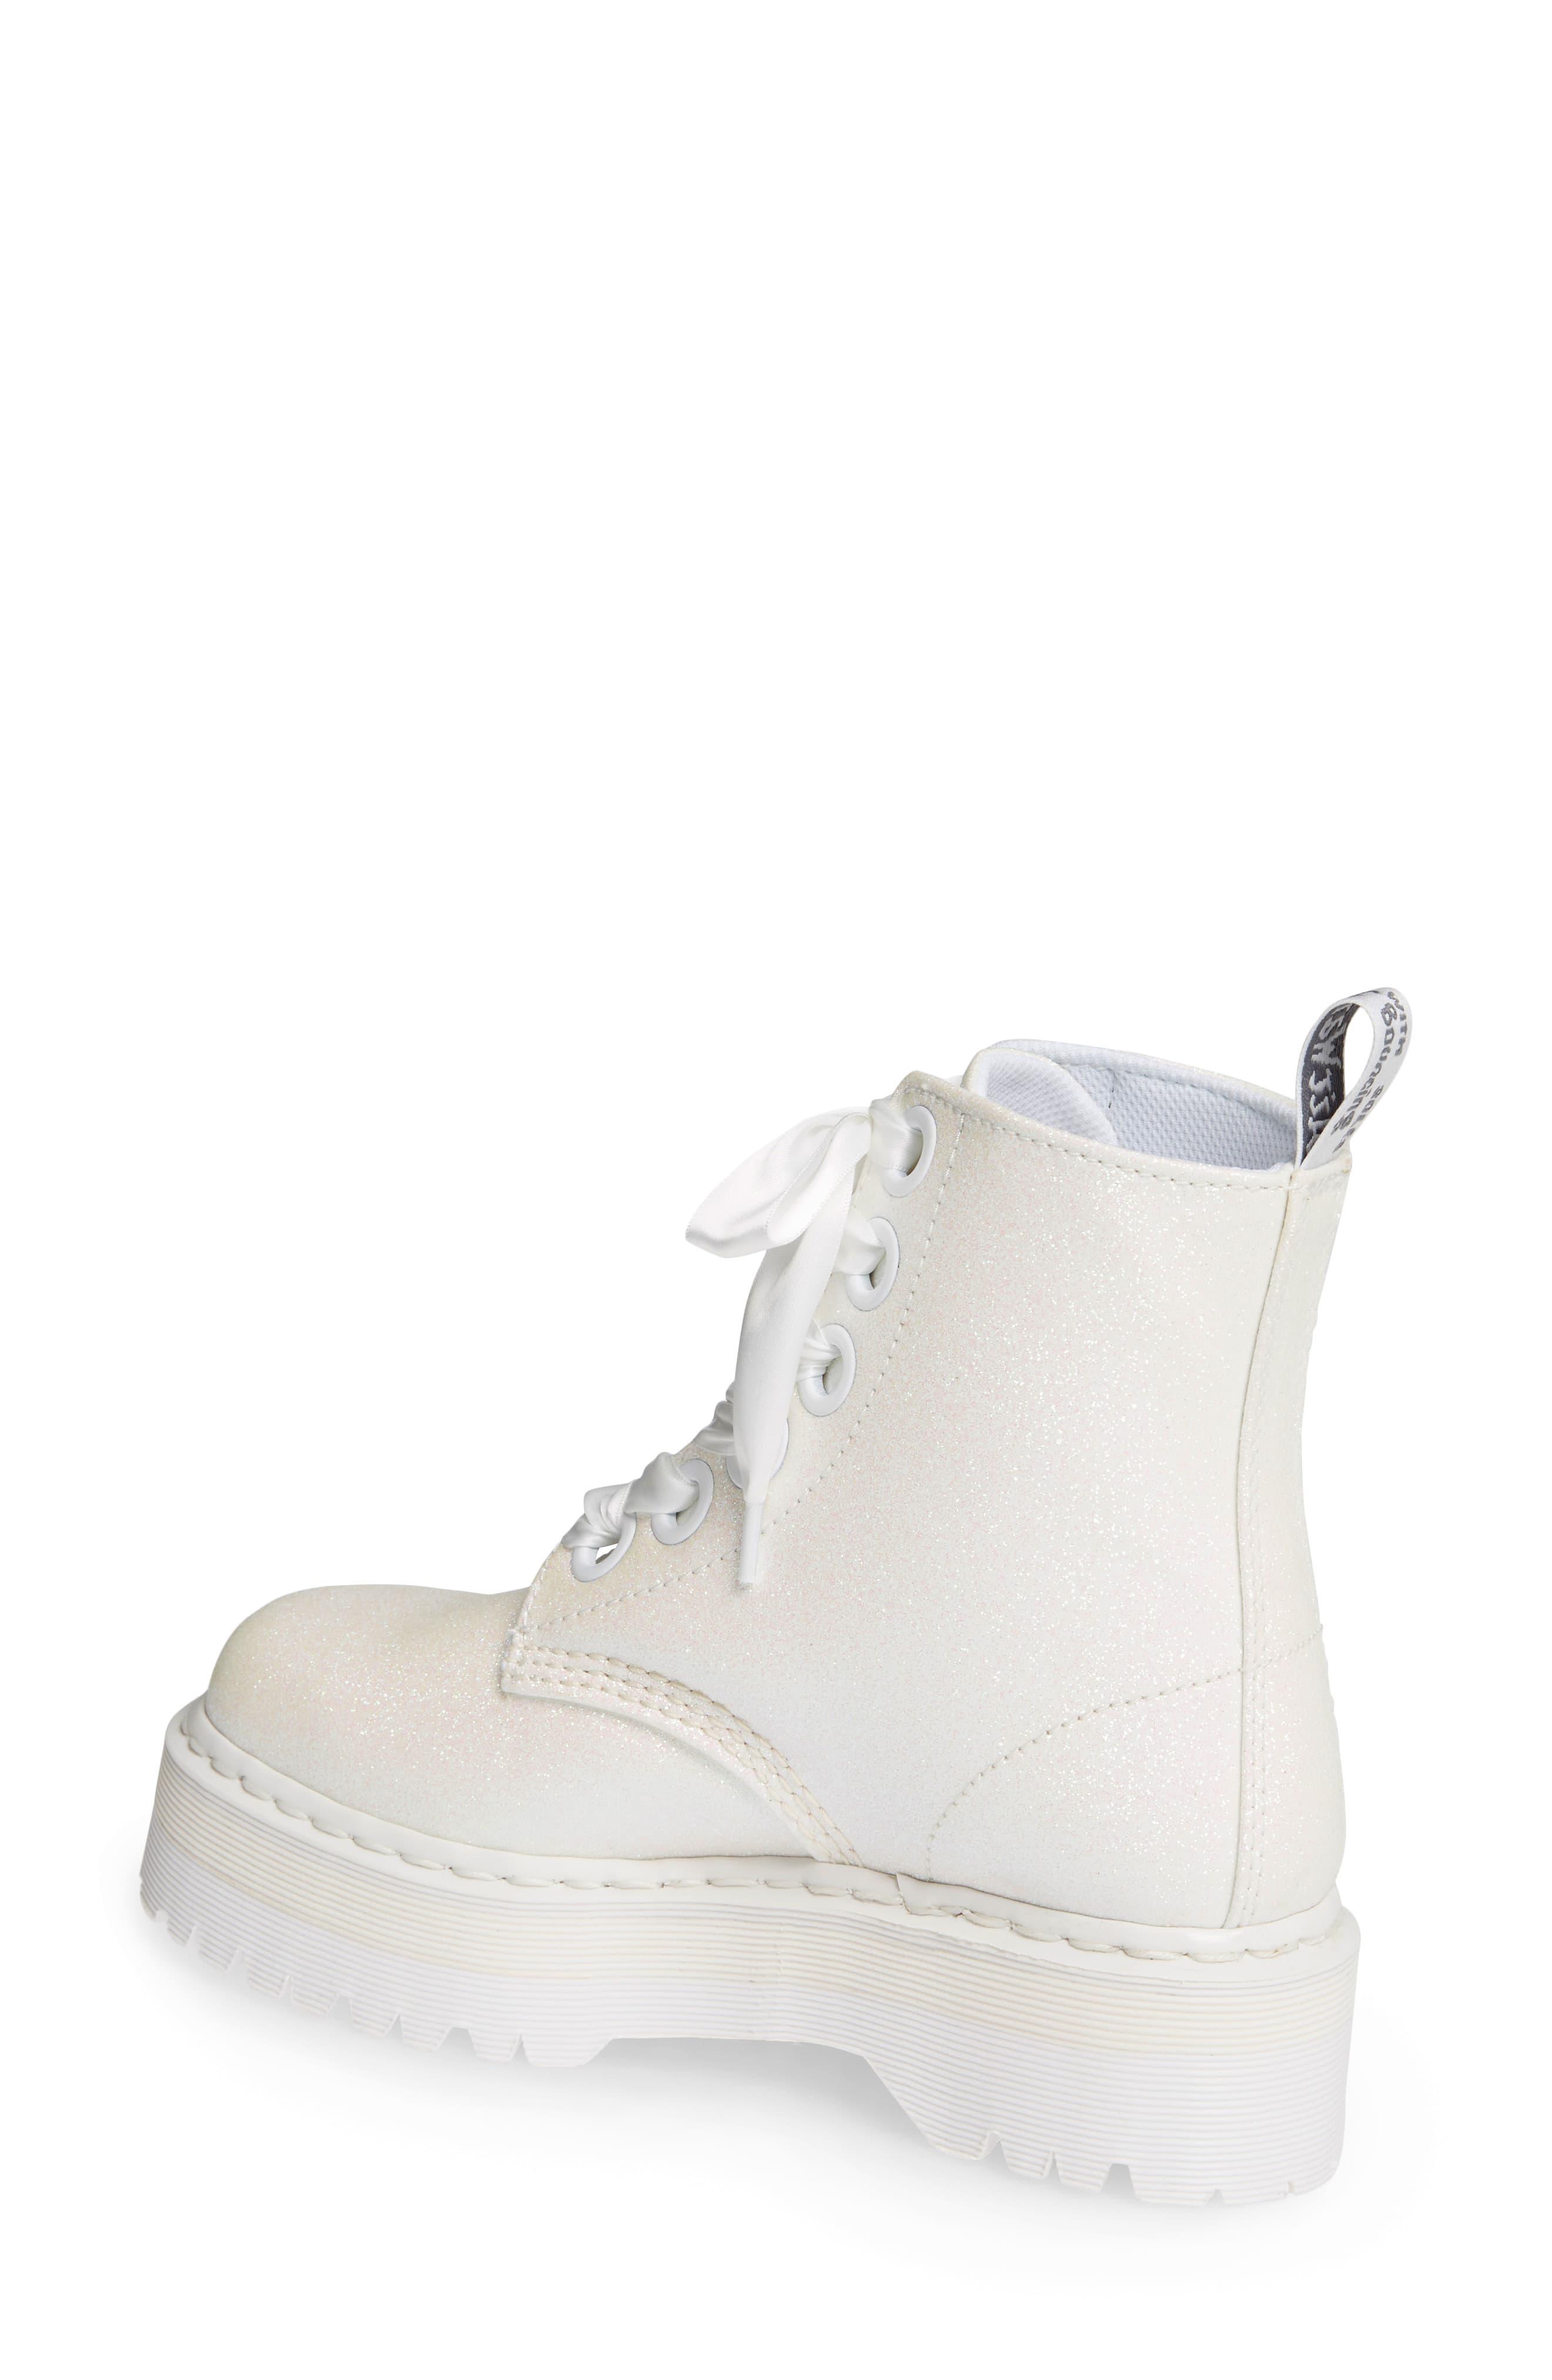 Dr. Martens Molly Glitter Boot in White | Lyst